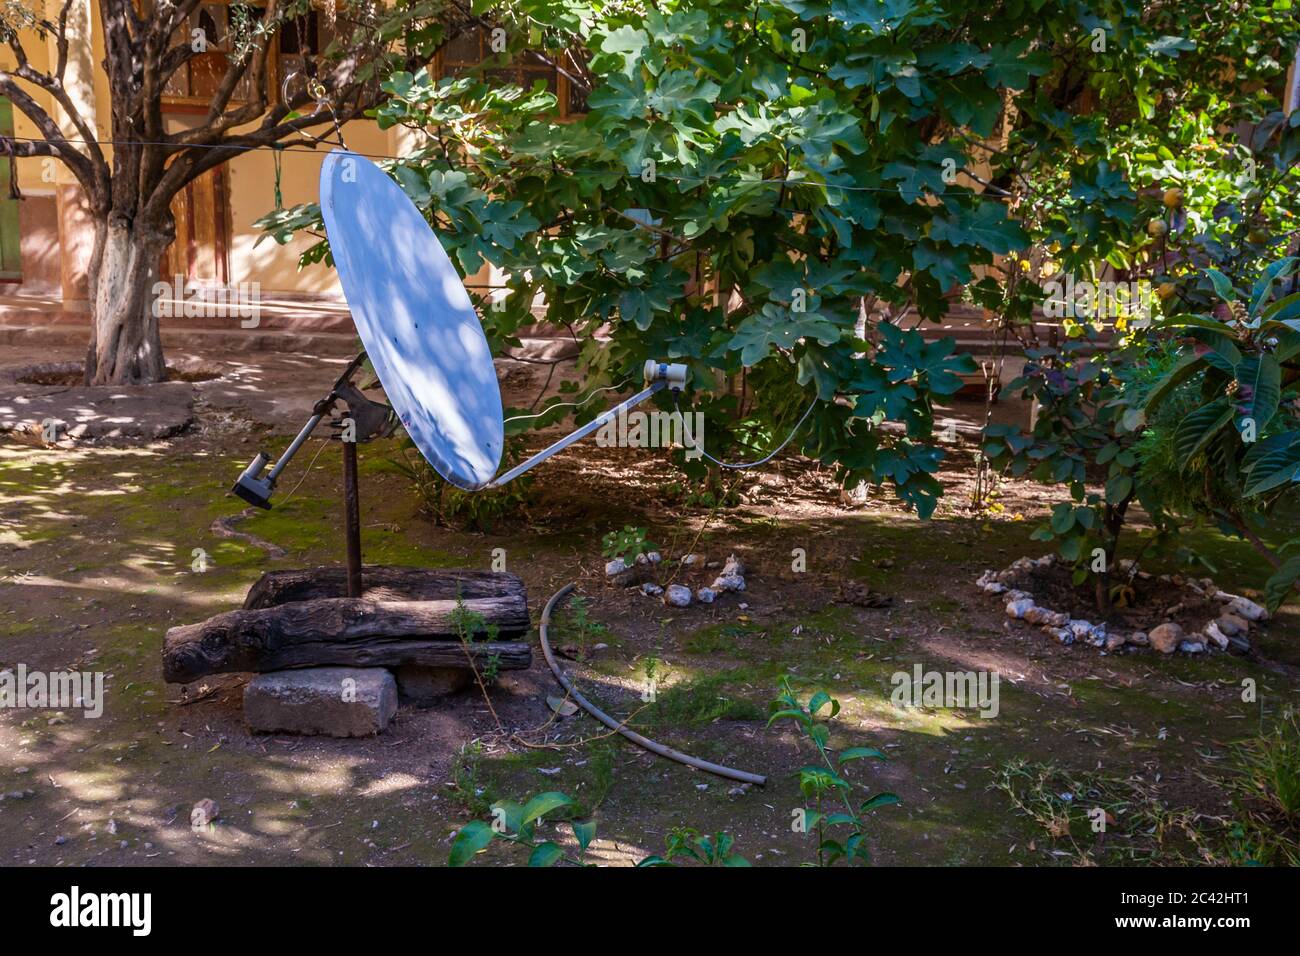 Impressions of Morocco: Satellite dish between fig trees Stock Photo